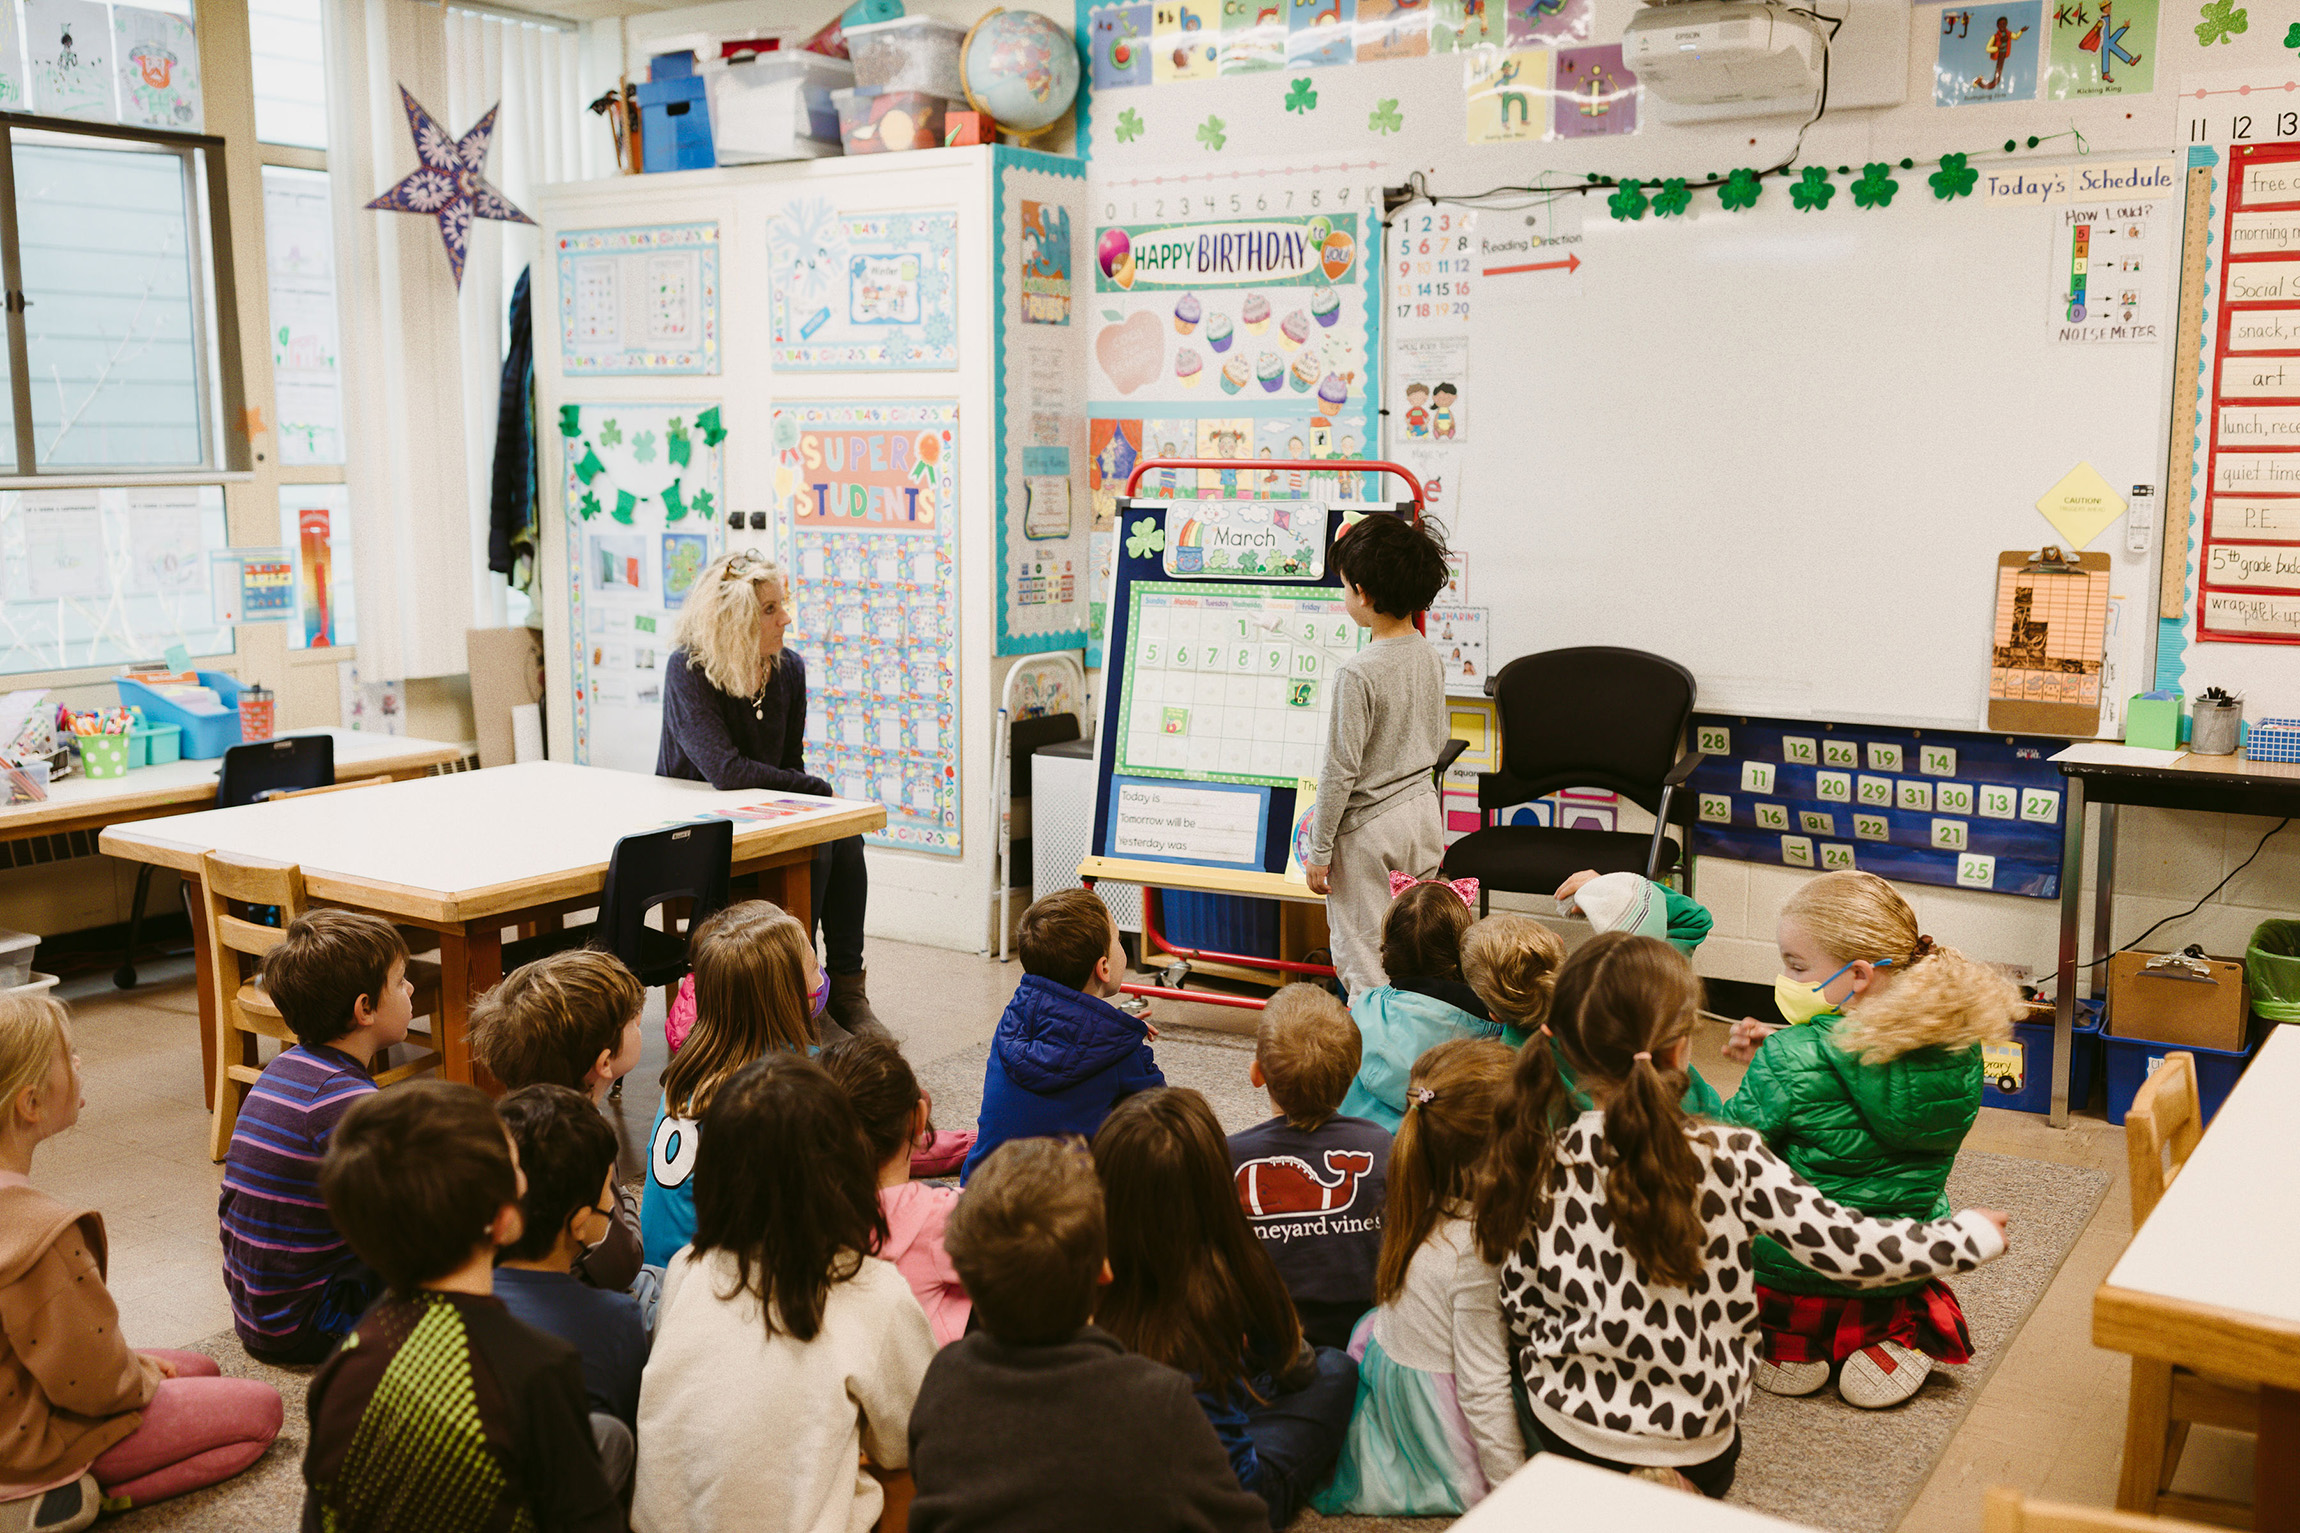 A standing student shows something on an easel to a class of students sitting on the floor while a teacher sits to the side